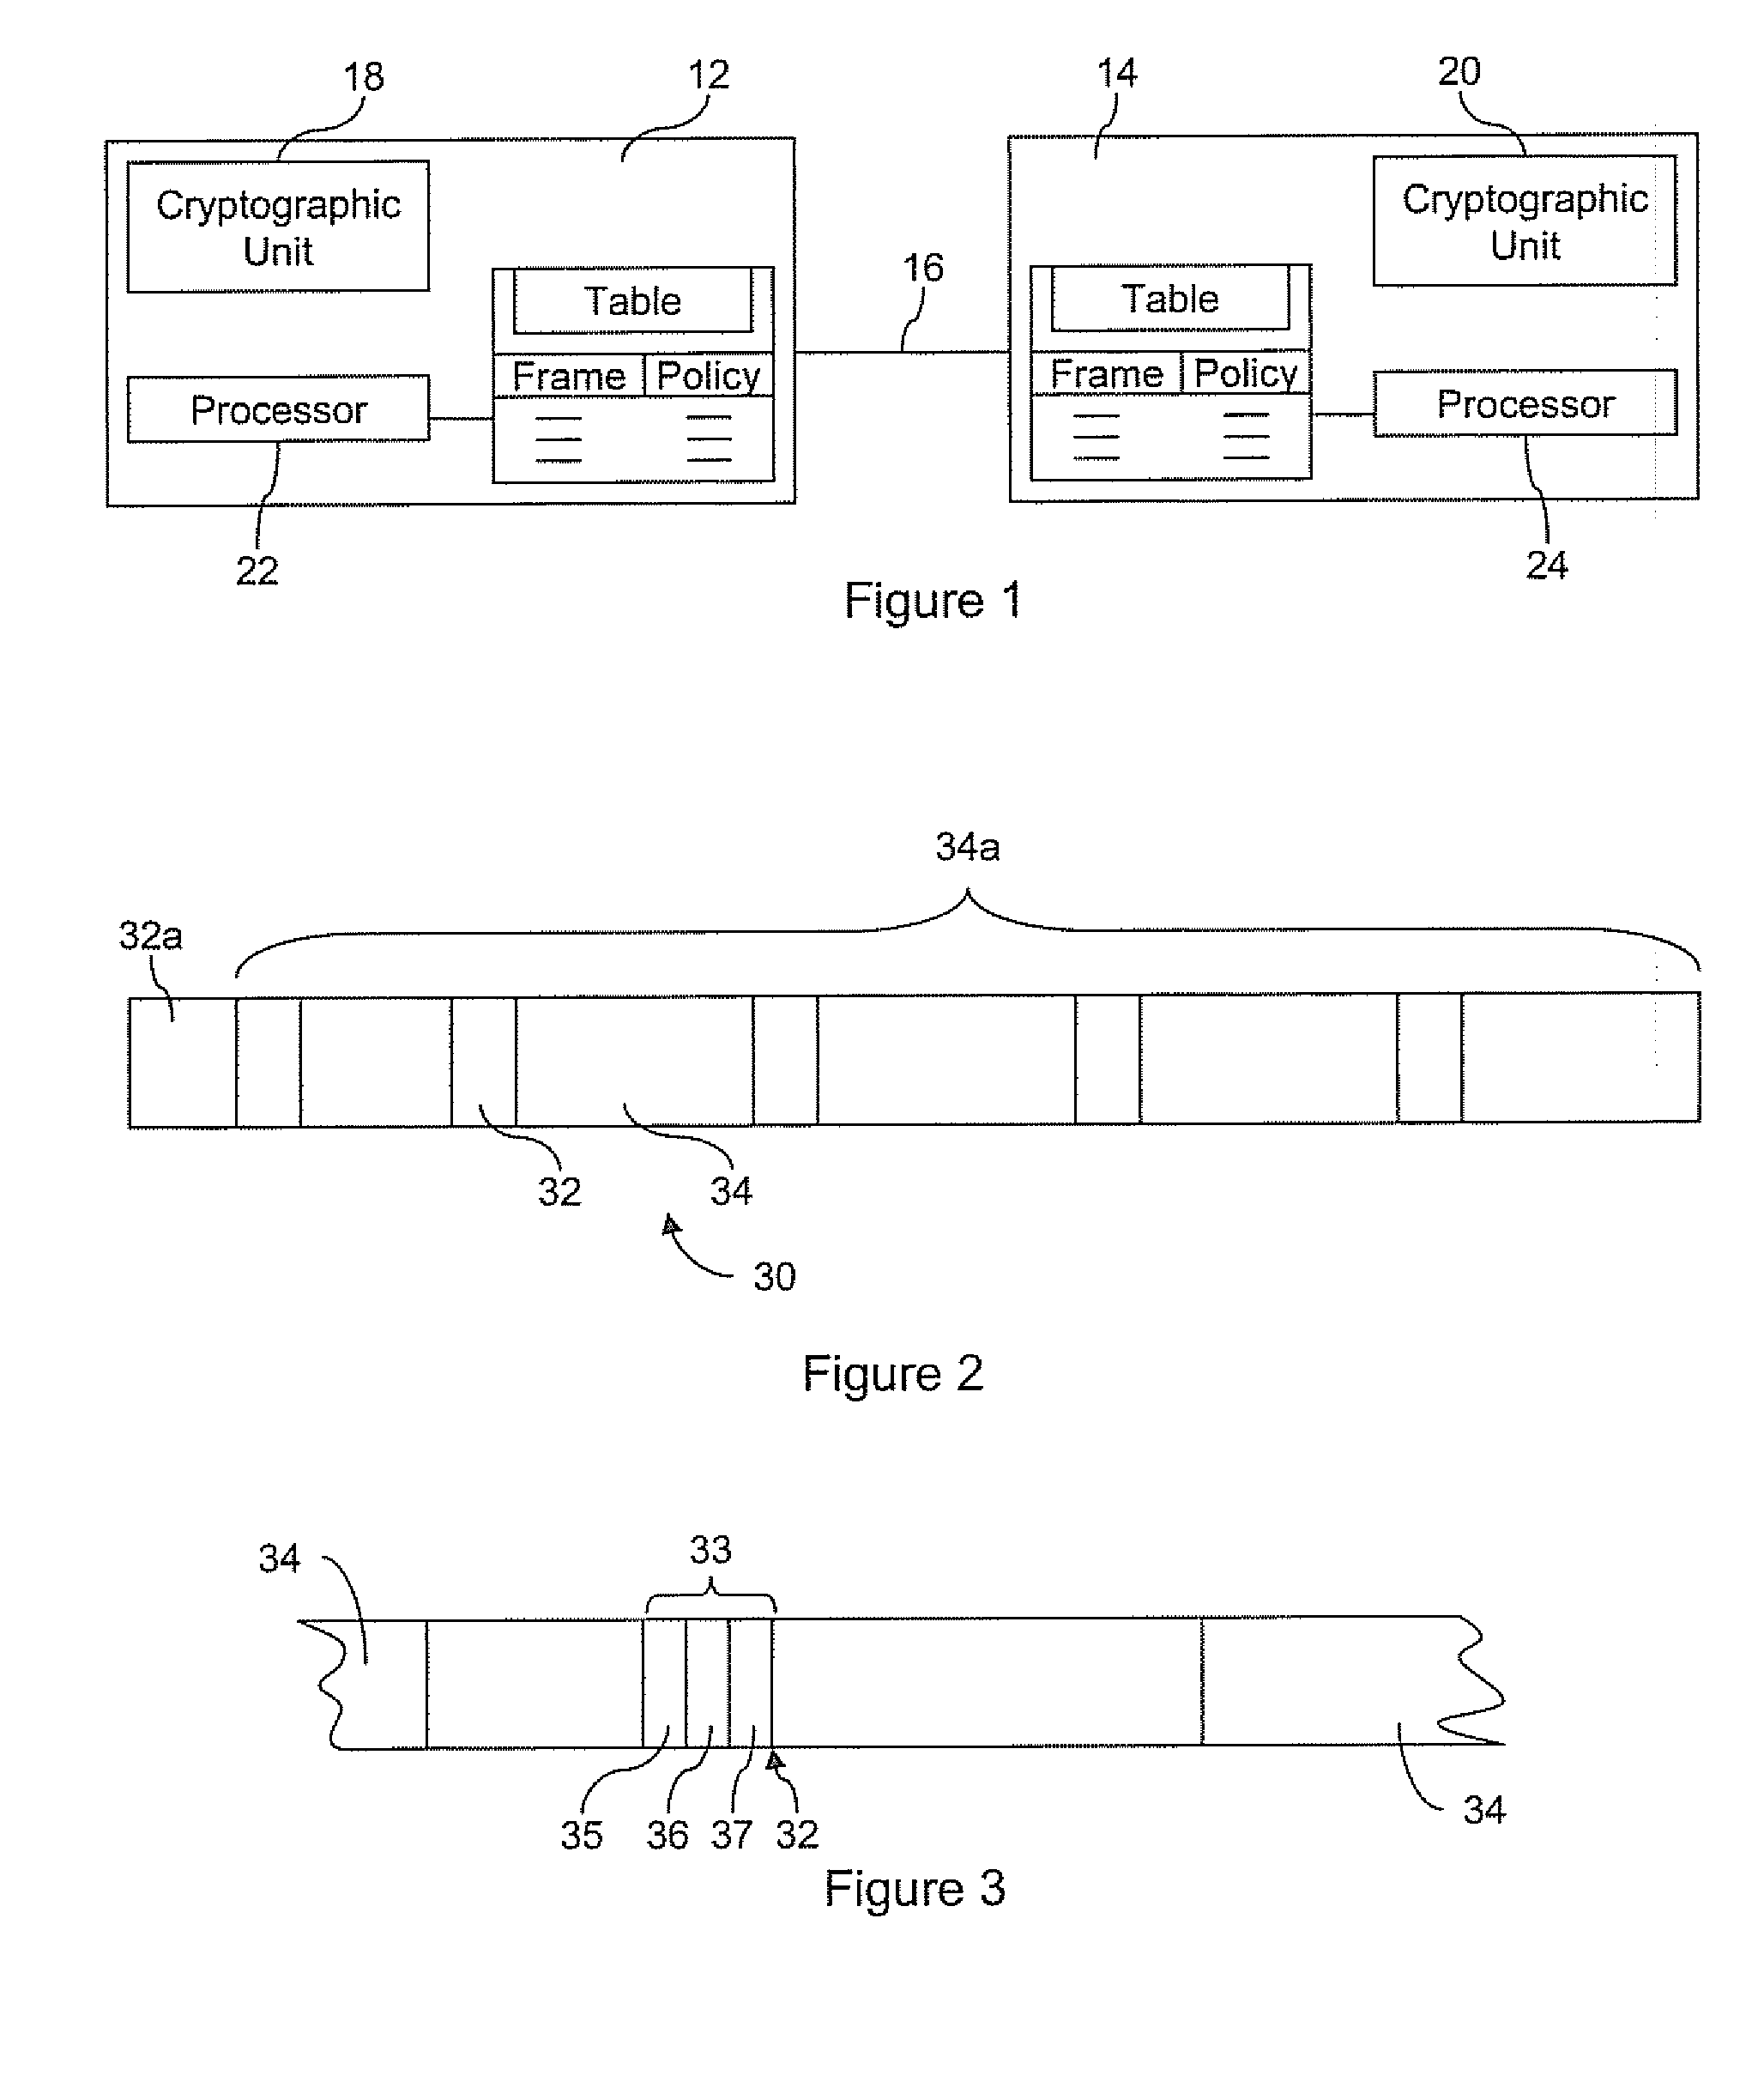 Method and apparatus for providing an adaptable security level in an electronic communication